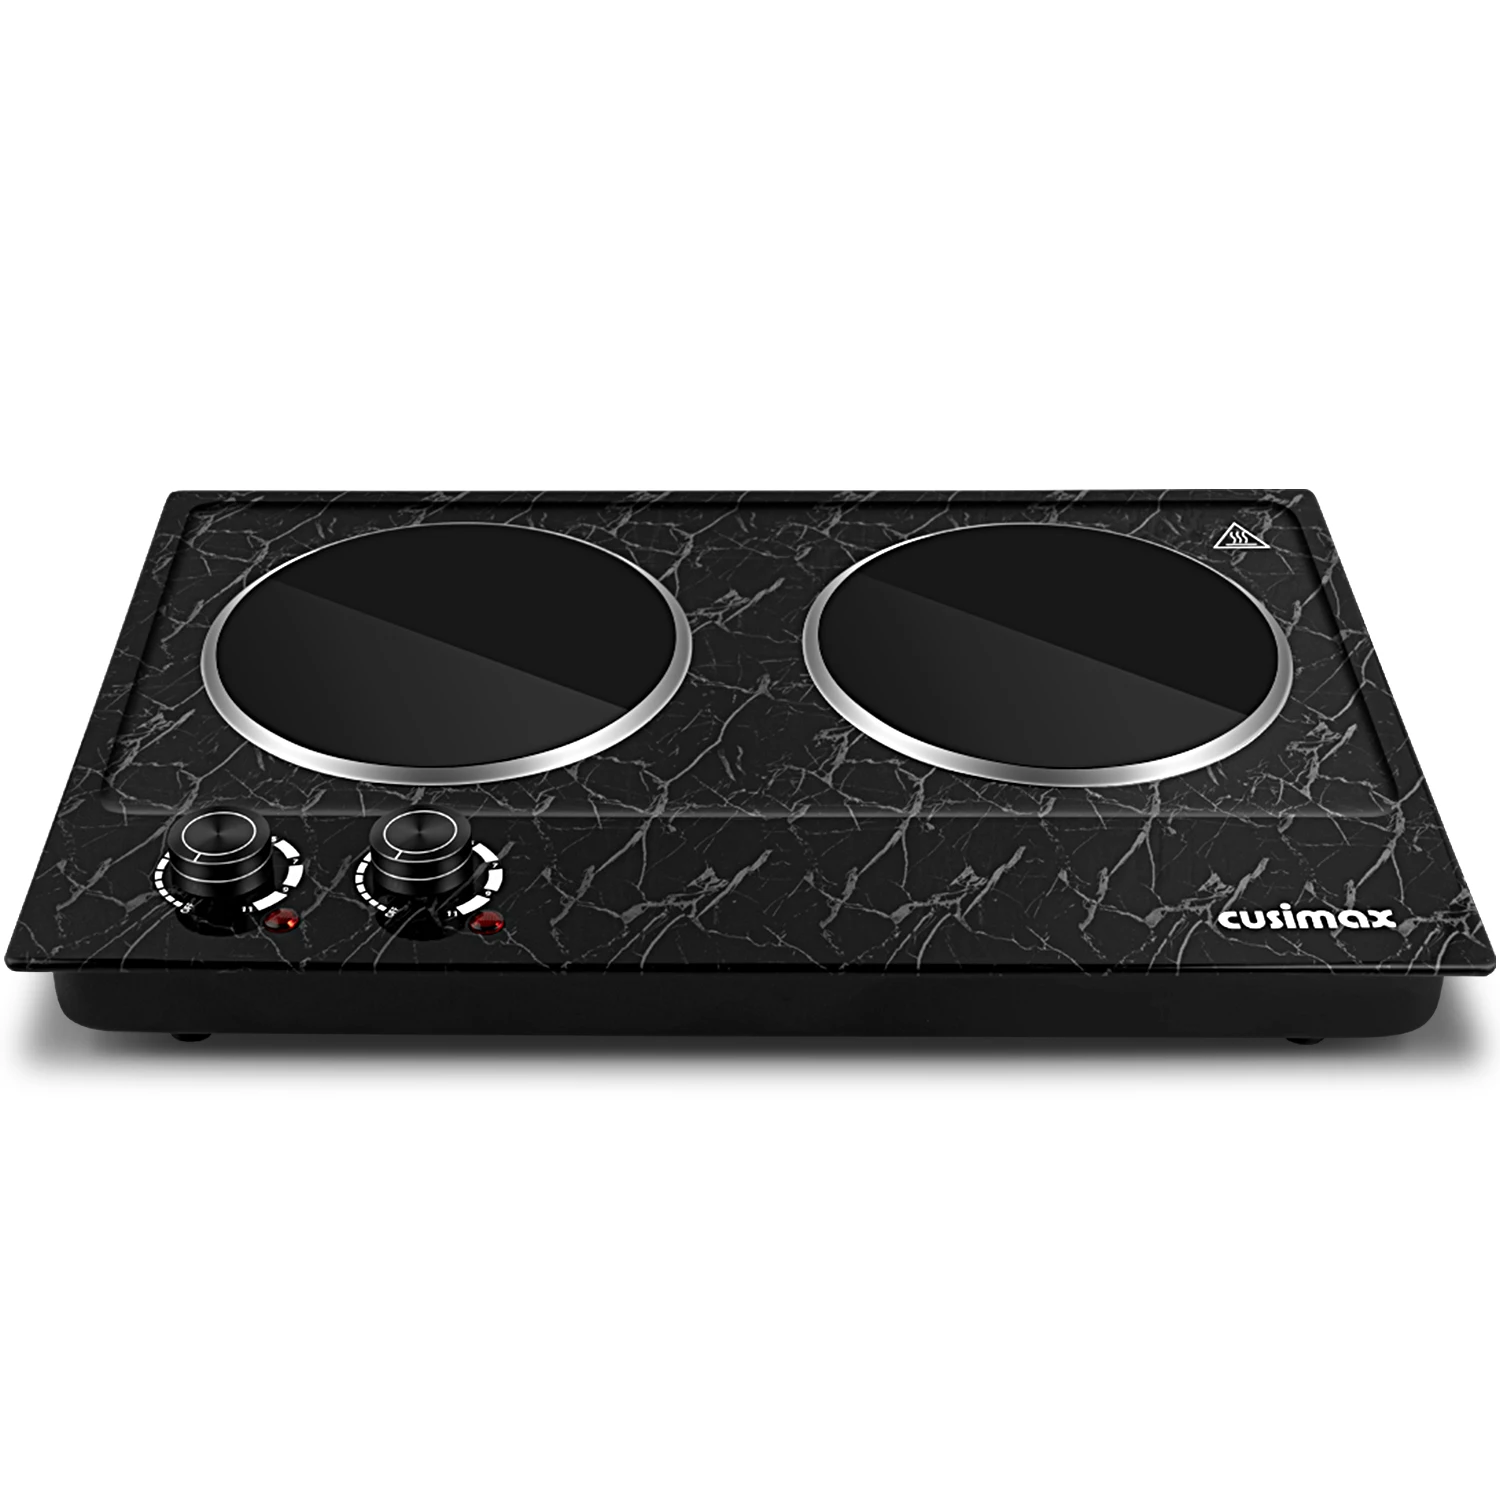 1800W Dual Control Portable Electric Stove Double Burner Electric Ceramic Hot Plate for Cooking  Infrared Electric Cooktop (1600522764112)